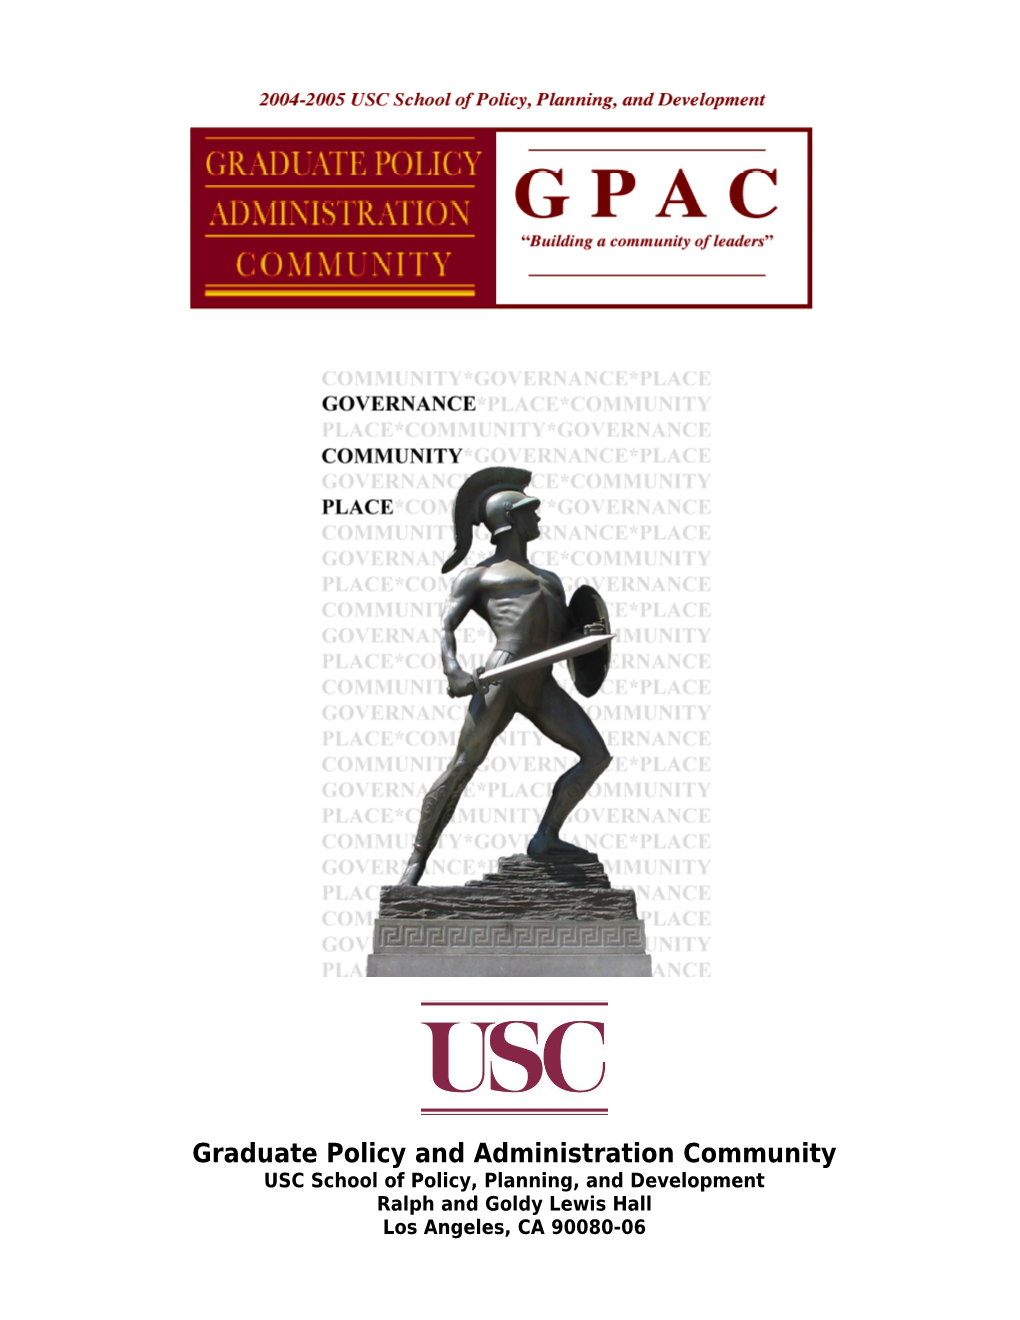 Graduate Policy and Administration Community